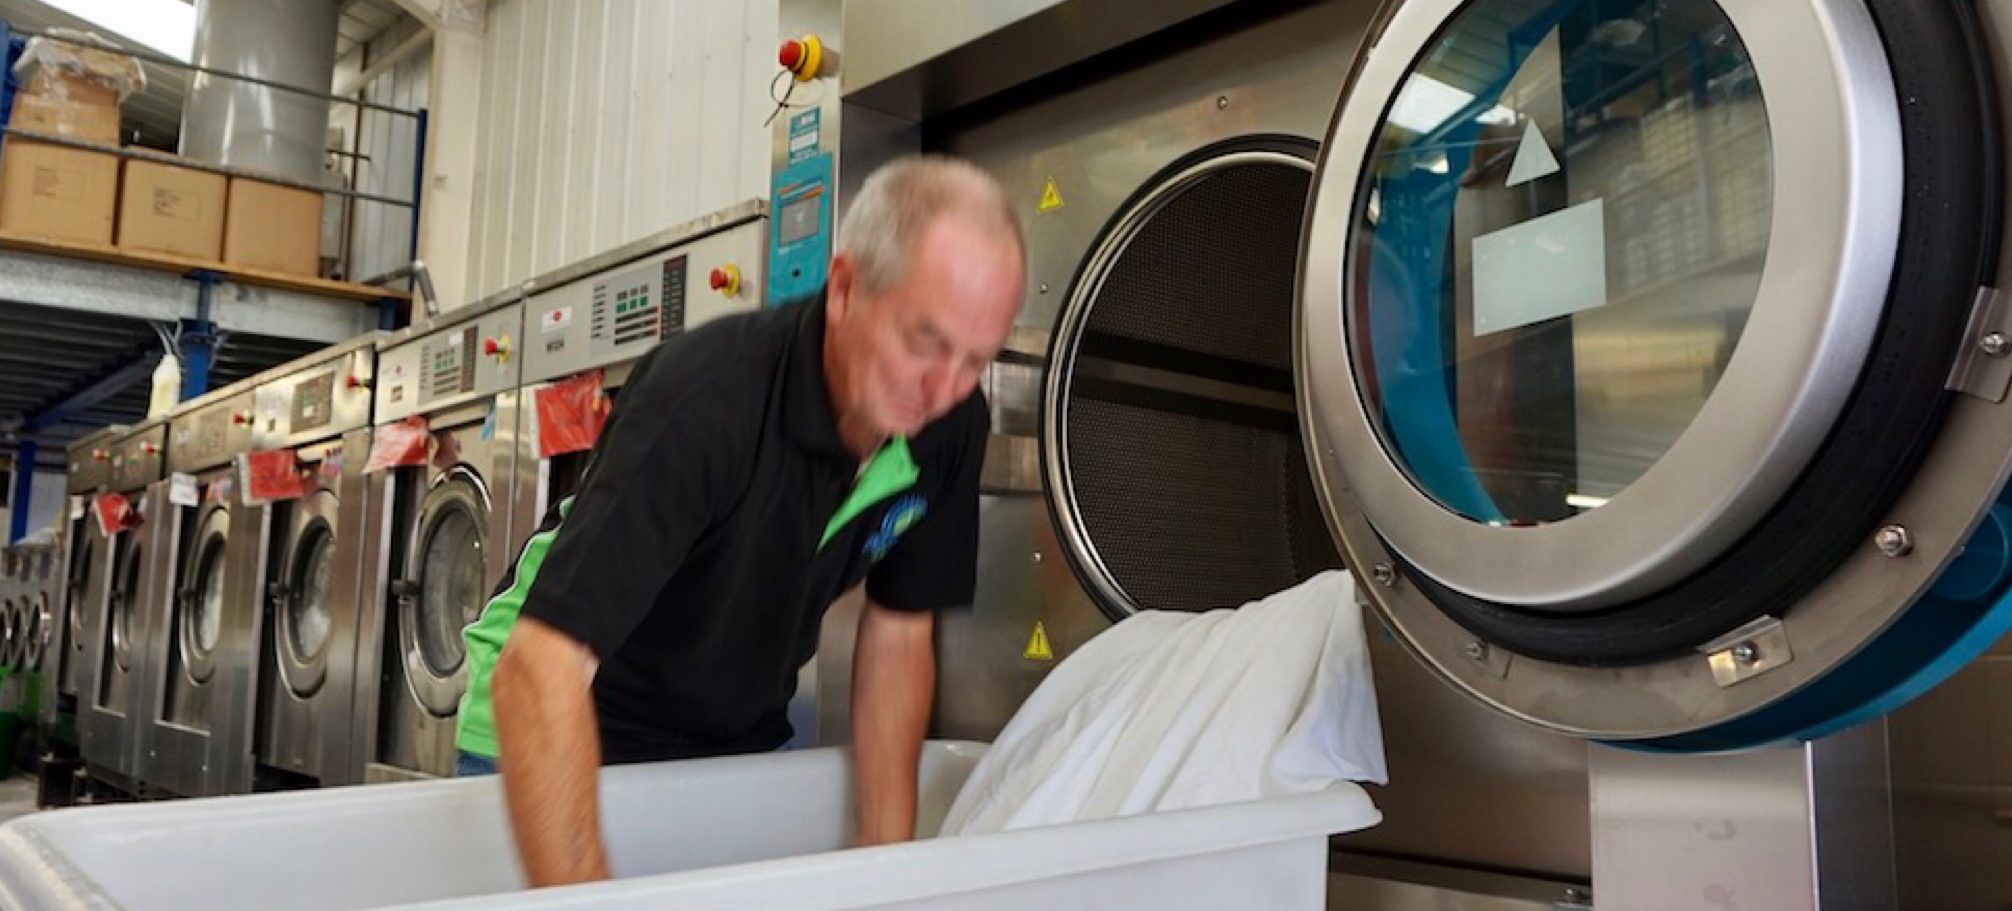 Looking for commercial laundry equipment? - Mag Laundry Equipment